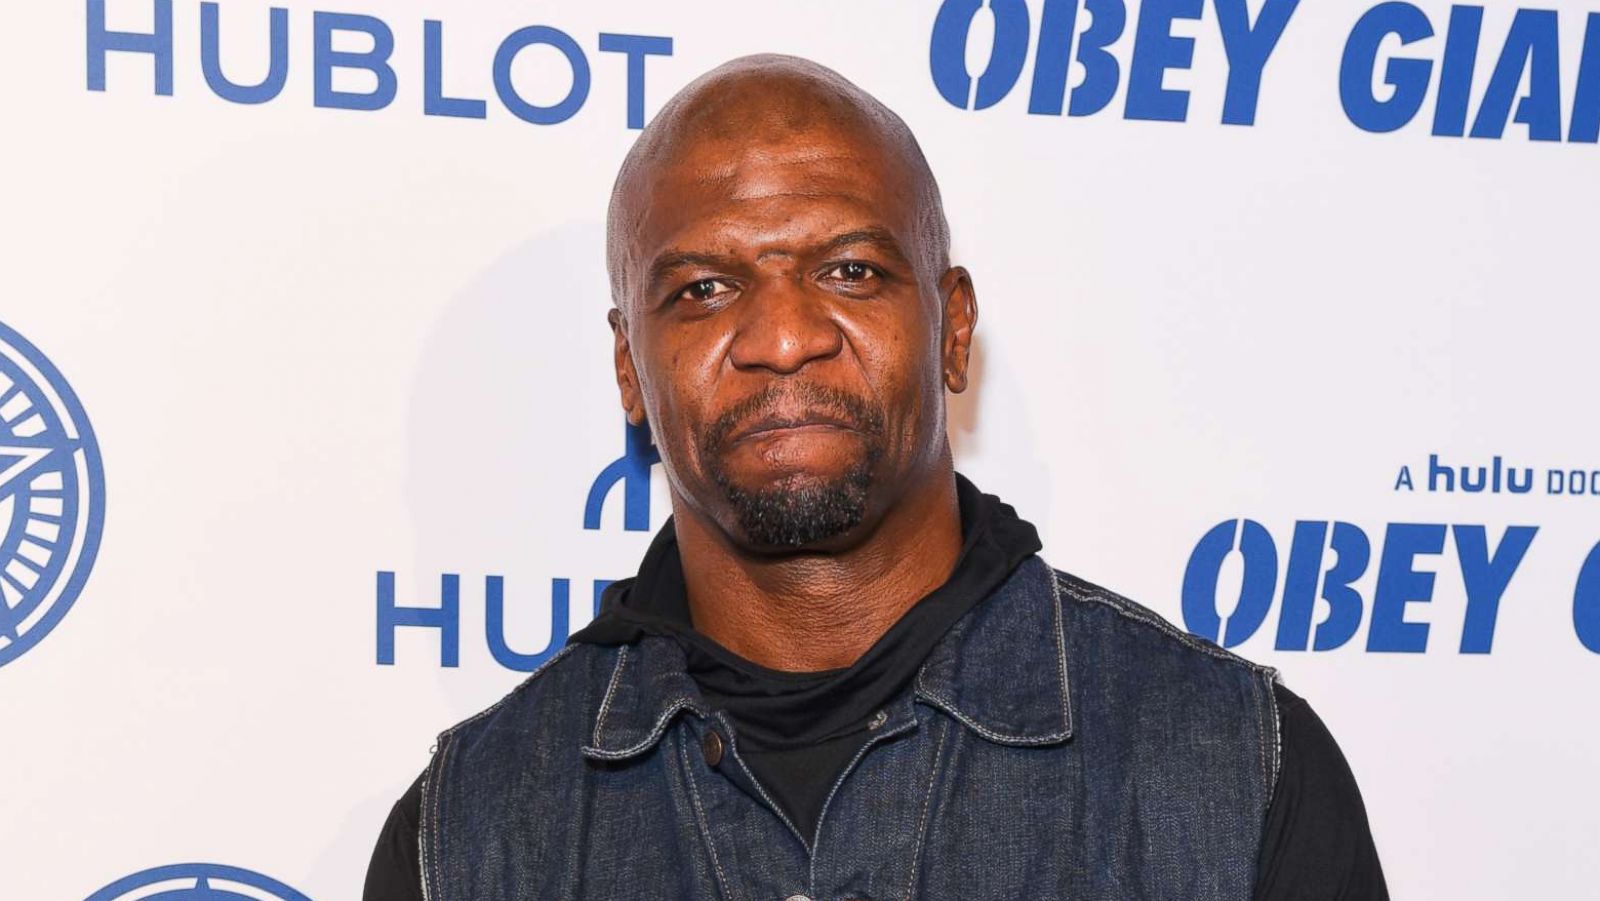 PHOTO: Terry Crews attends Photo Op For Hulu's "Obey Giant" on Nov. 7, 2017, in Los Angeles.